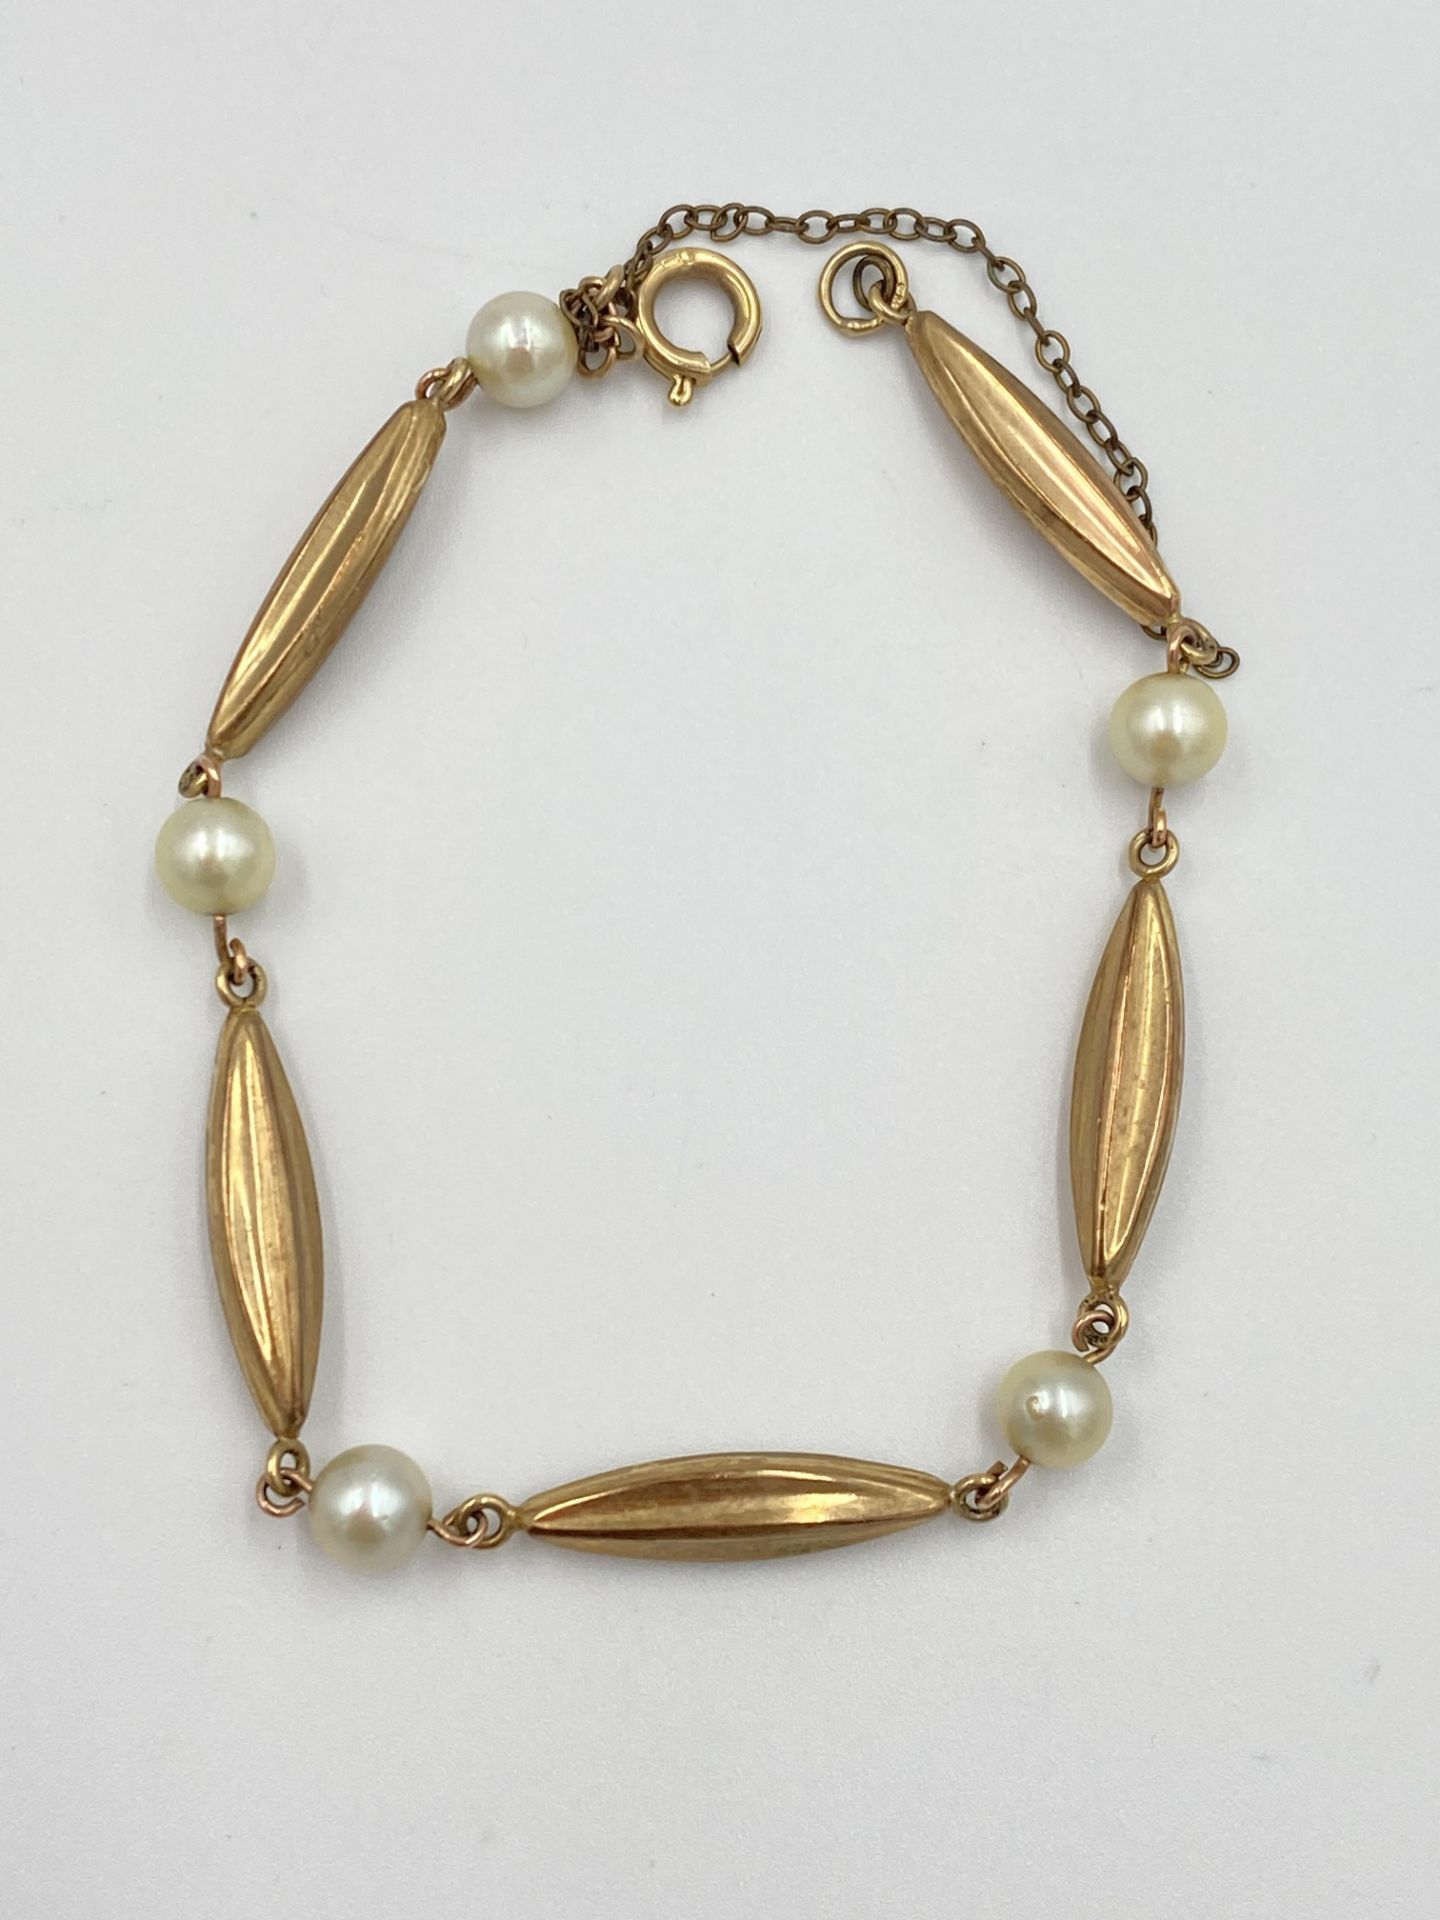 9ct gold and pearl bracelet - Image 3 of 4